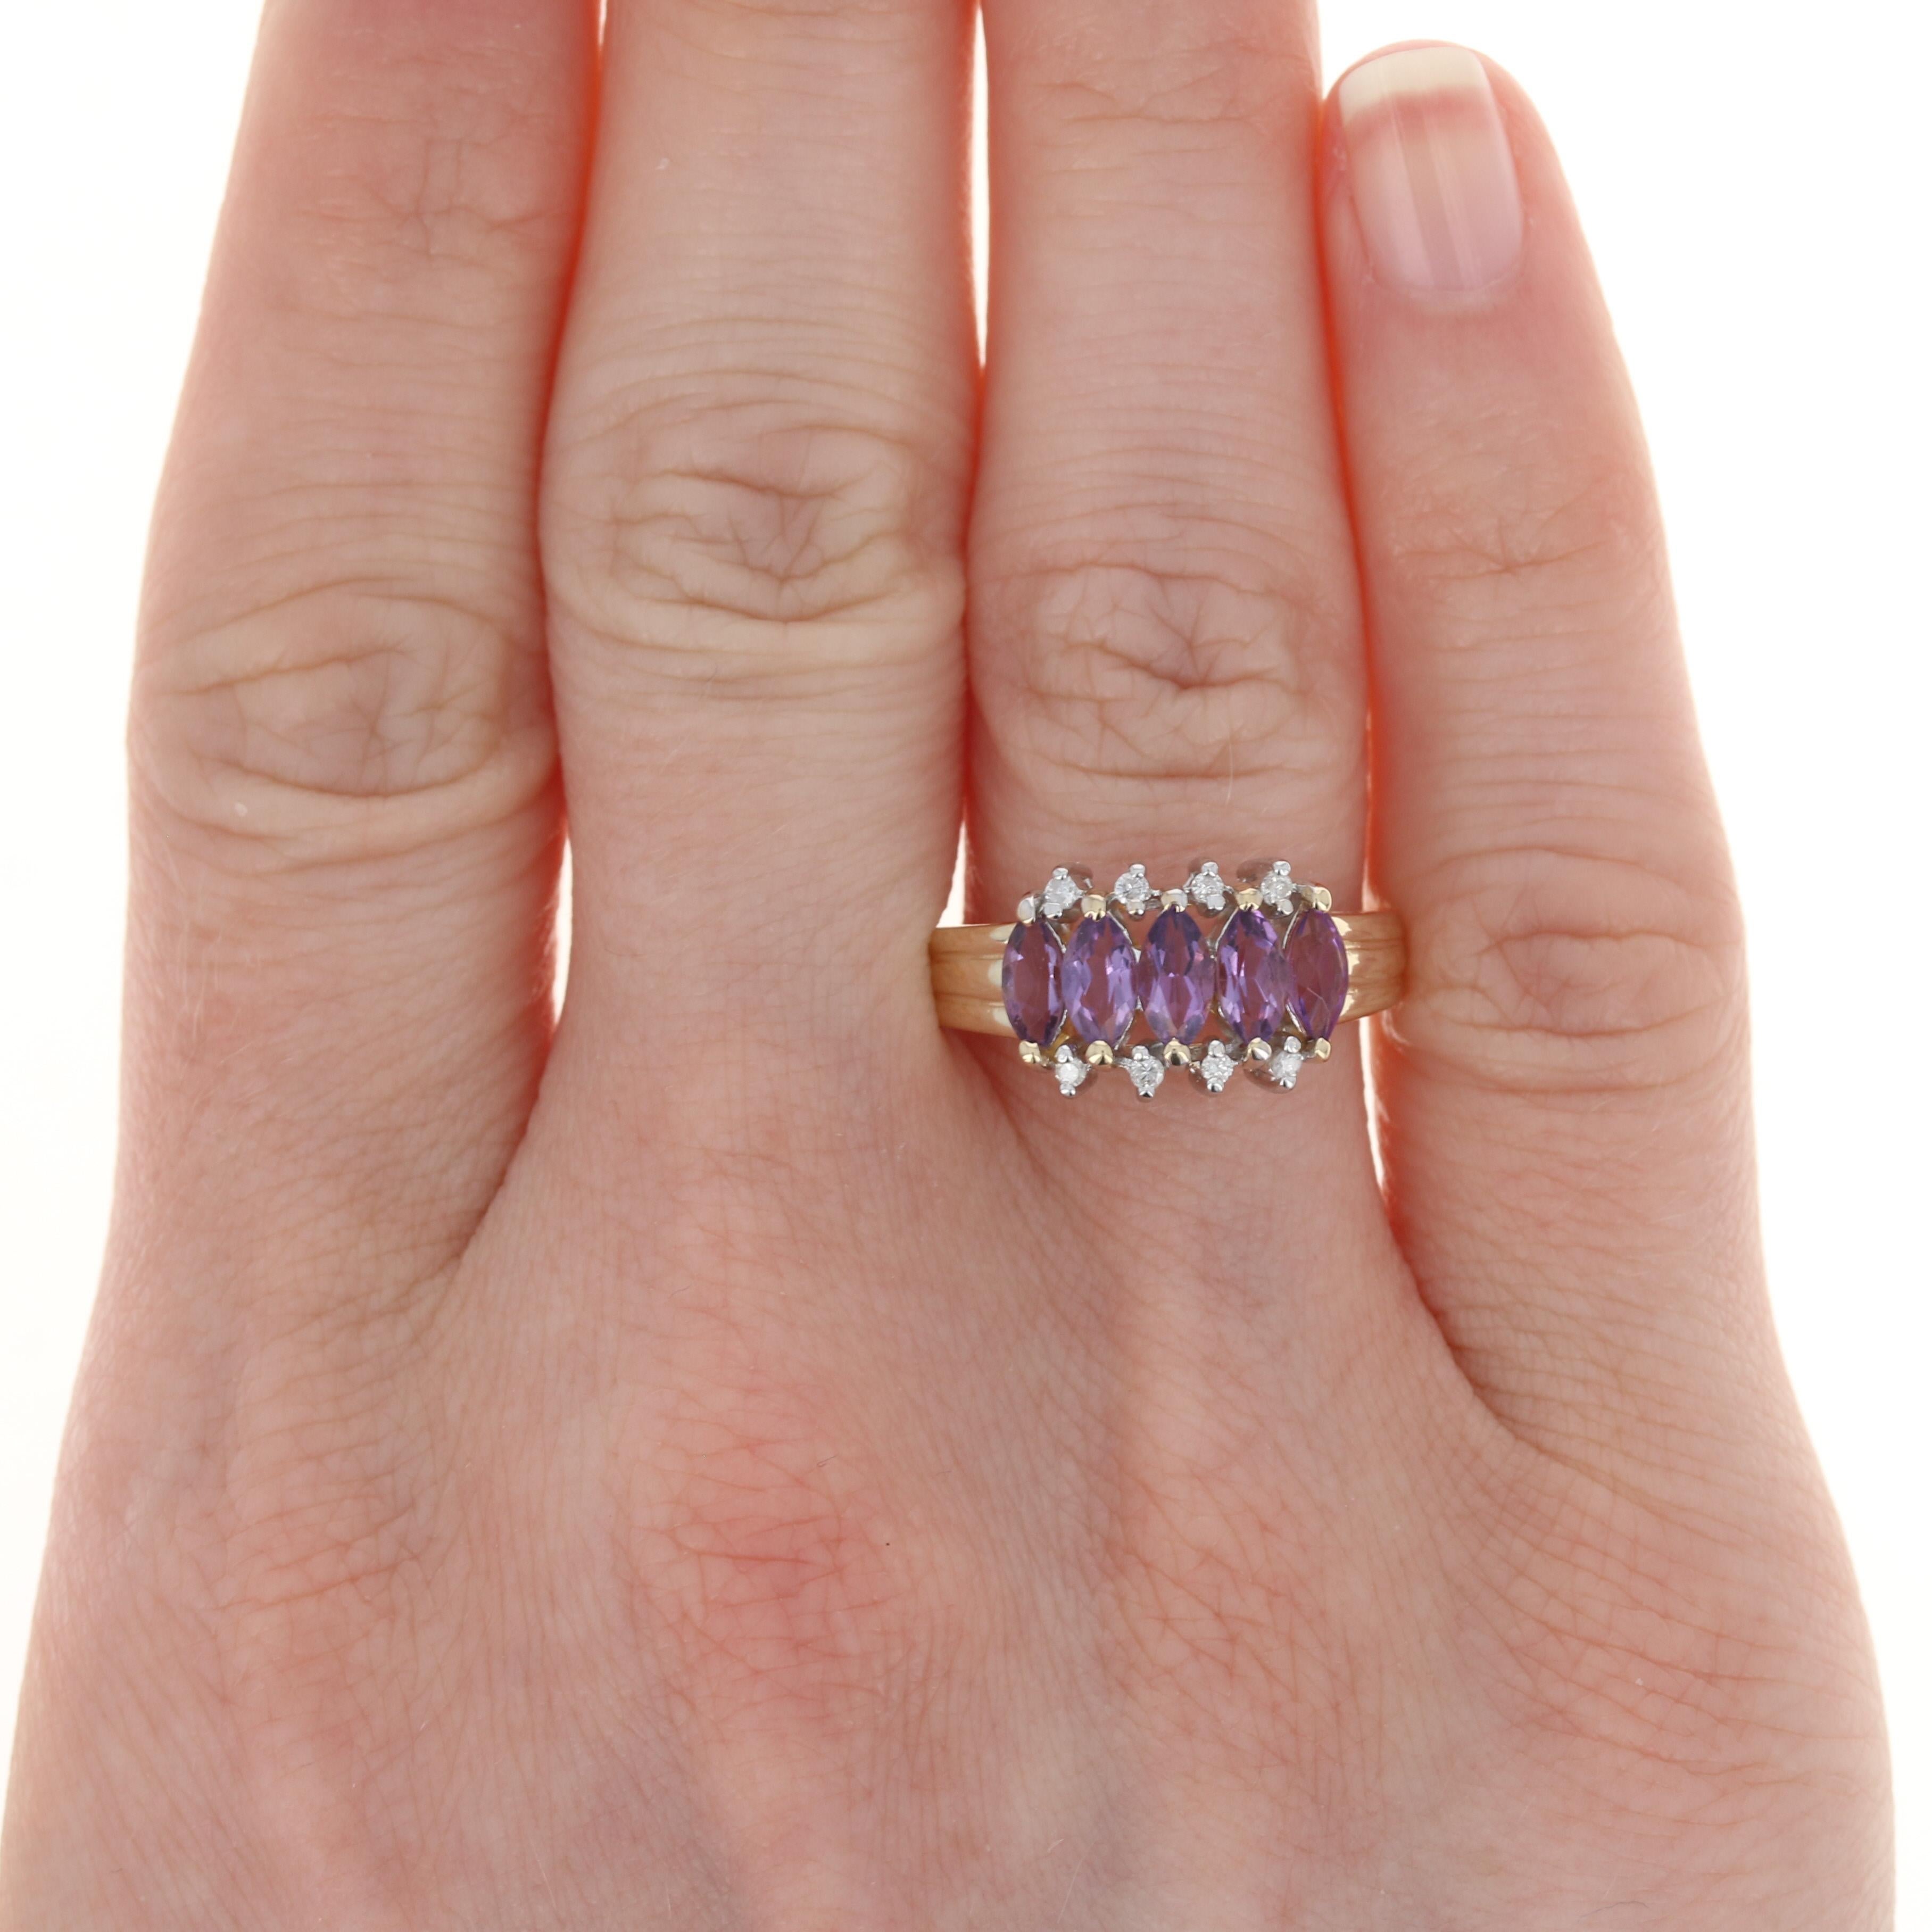 Size: 8
 Sizing Fee: Up 2 sizes for $25 or down 2 sizes for $20
 
 Metal Content: 14k Yellow Gold & 14k White Gold 
 
 Stone Information: 
 Genuine Amethysts 
 Carats: 1.00ctw
 Cut: Marquise
 Color: Purple
 
 Natural Diamonds
 Carats: .08ctw
 Cut: